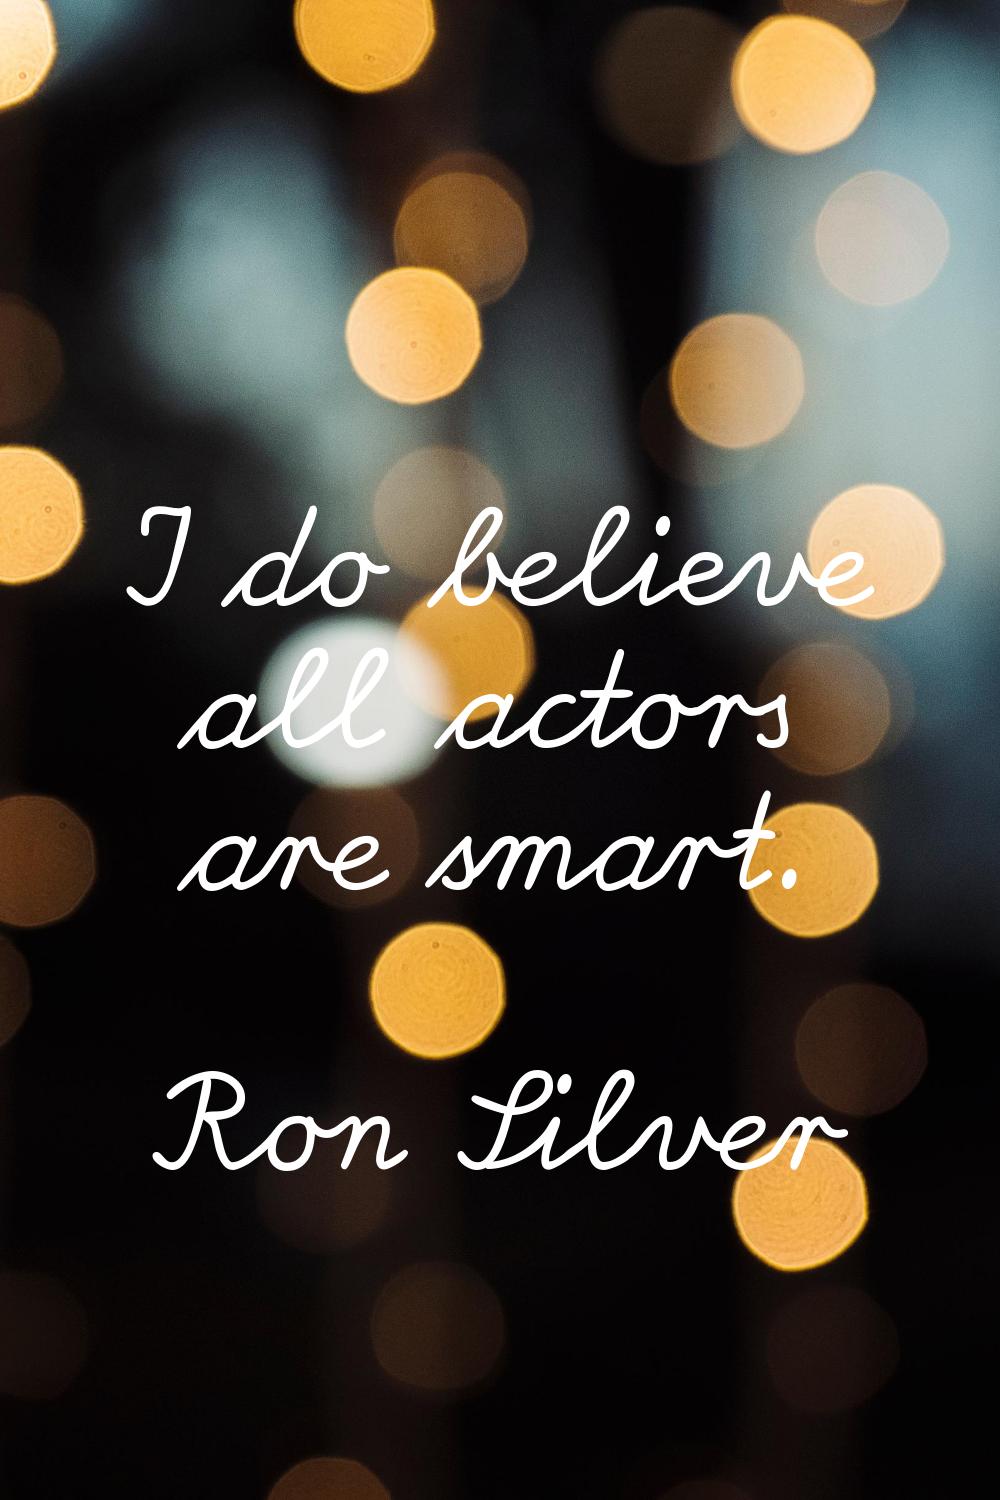 I do believe all actors are smart.